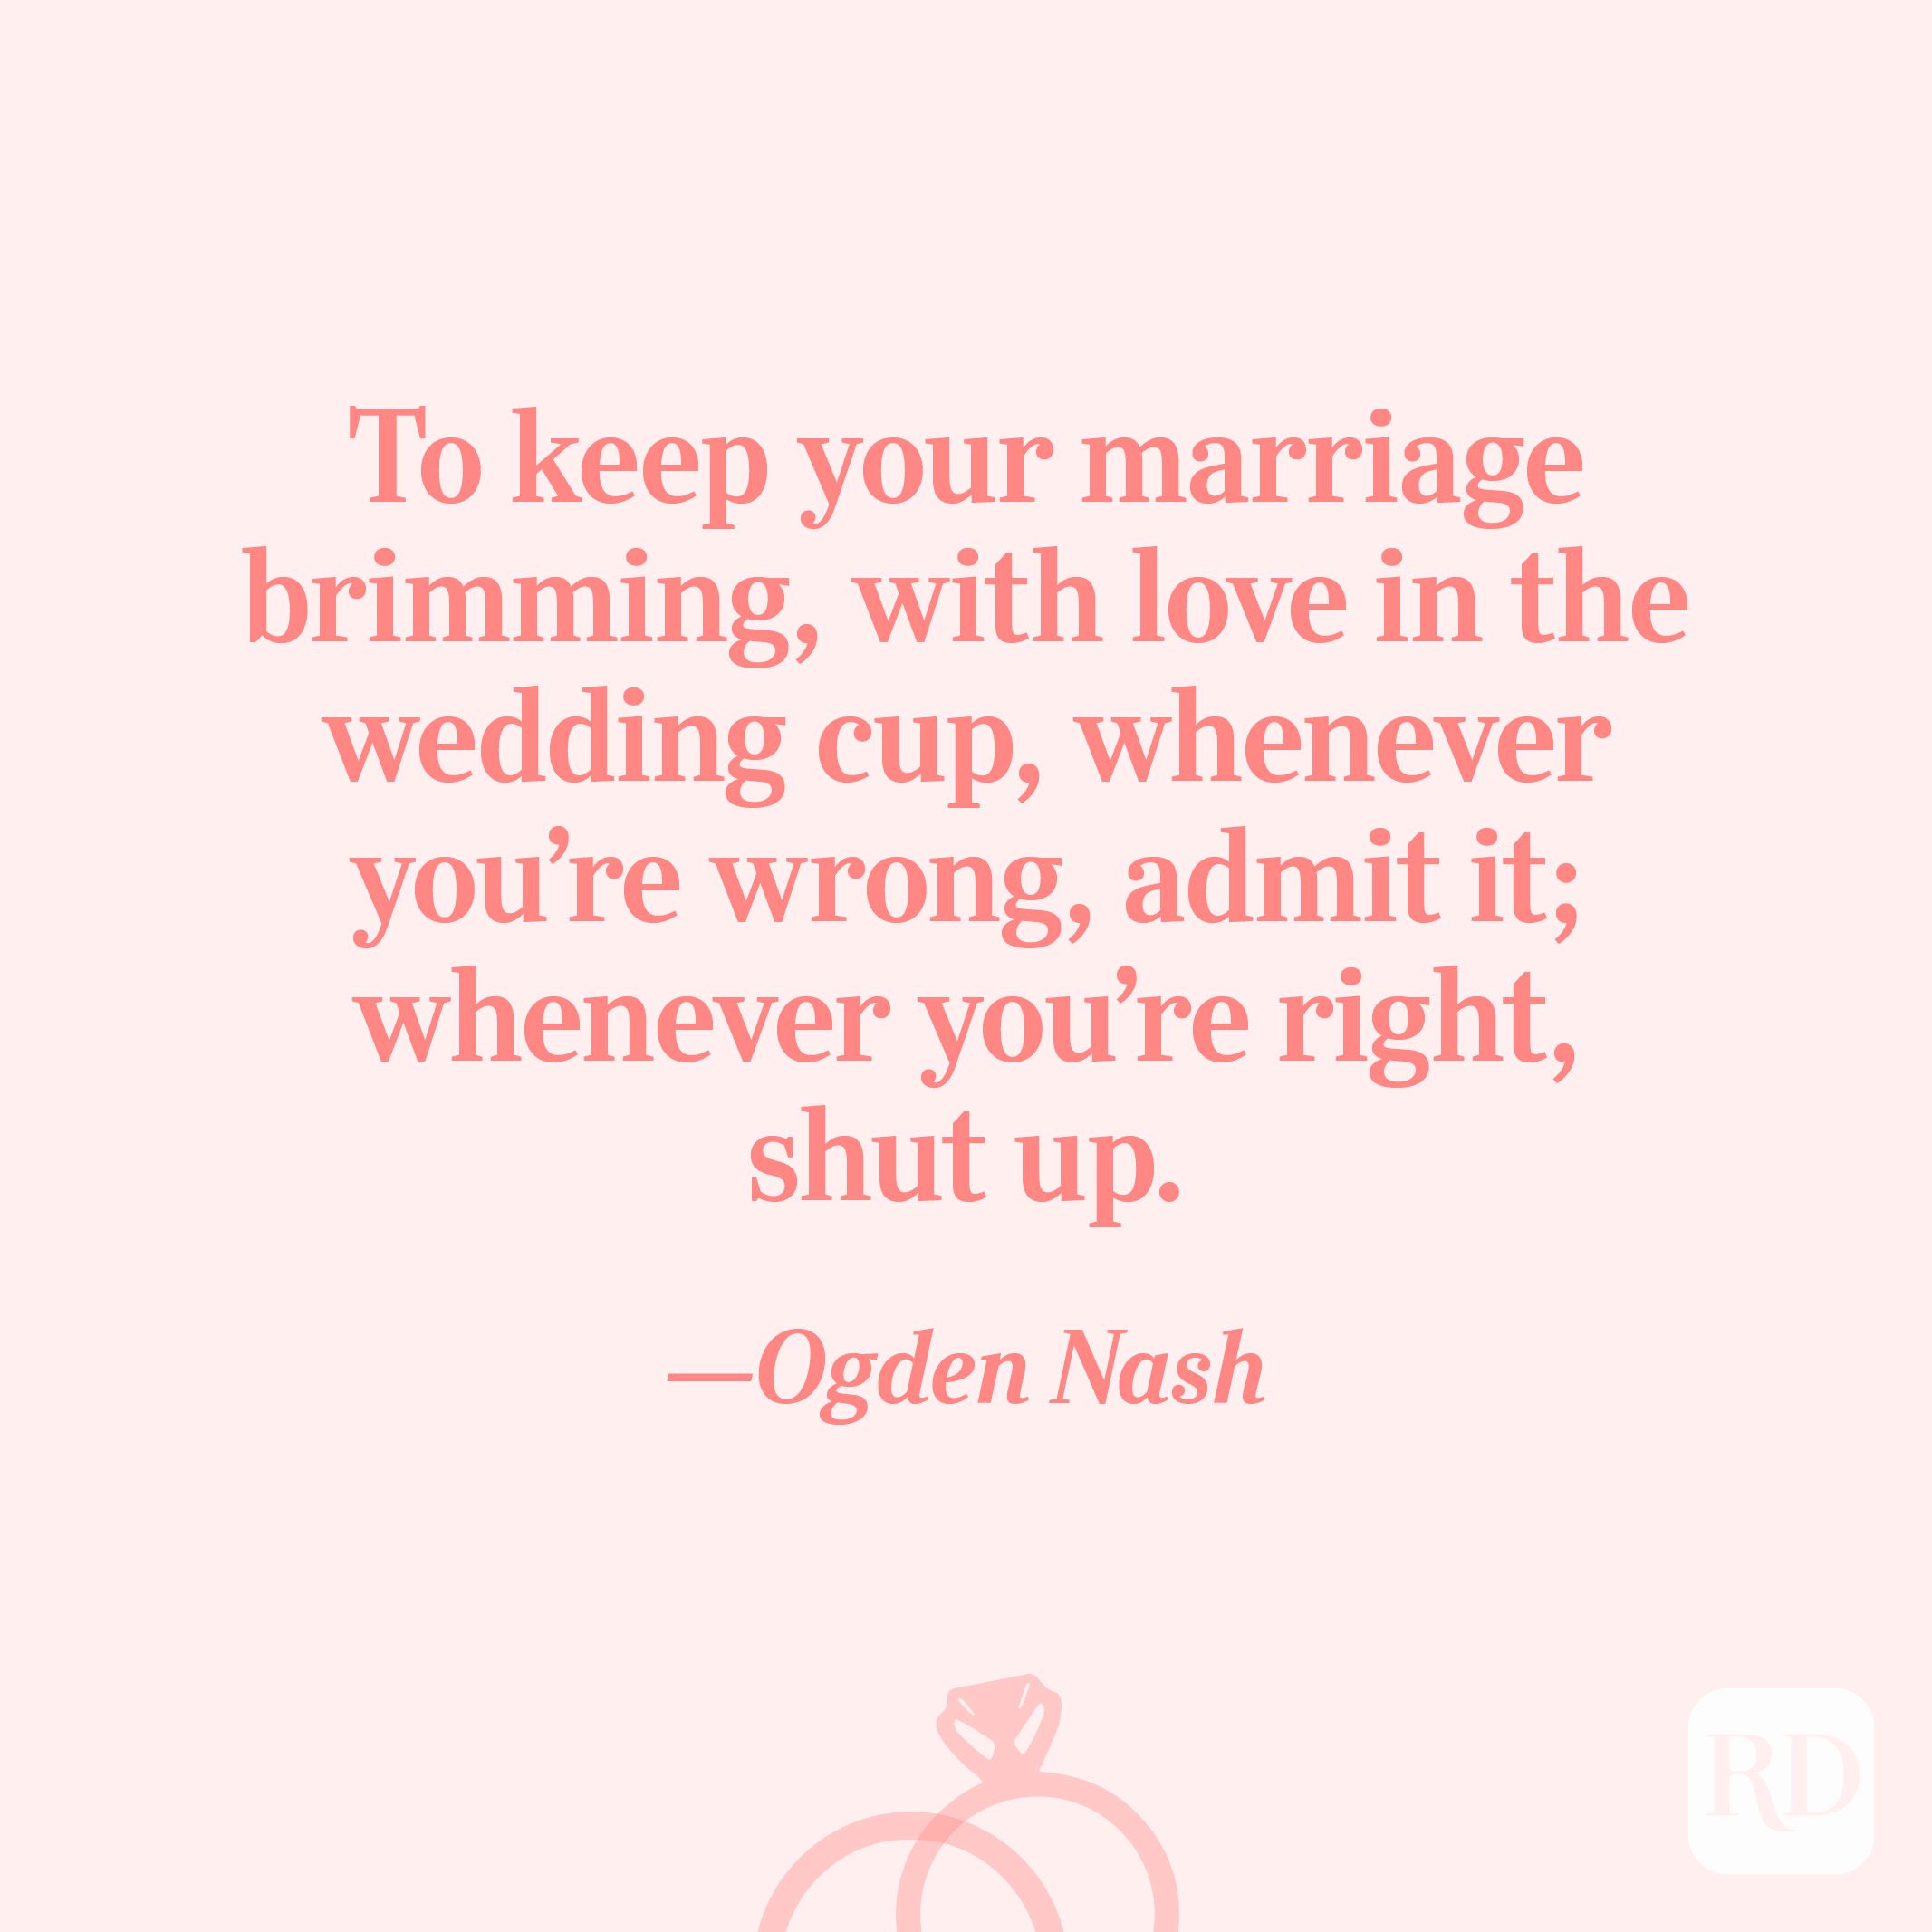 “To keep your marriage brimming, with love in the wedding cup, whenever you’re wrong, admit it; whenever you’re right, shut up.”—Ogden Nash